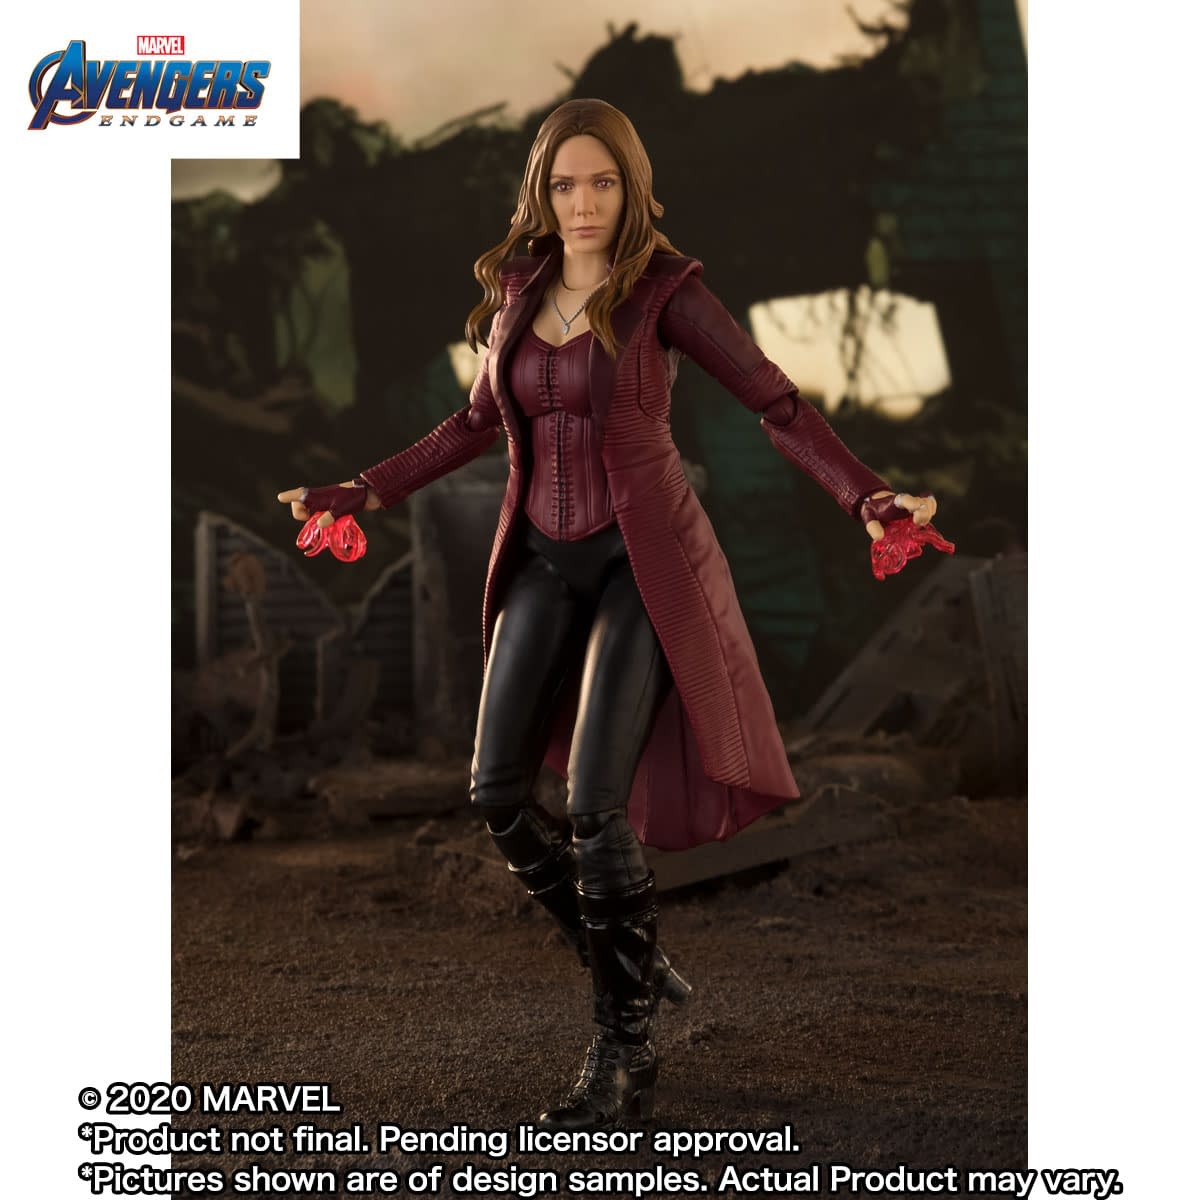 S.H. Figuarts - Avengers: Endgame: Scarlet Witch - P-Bandai Exclusive